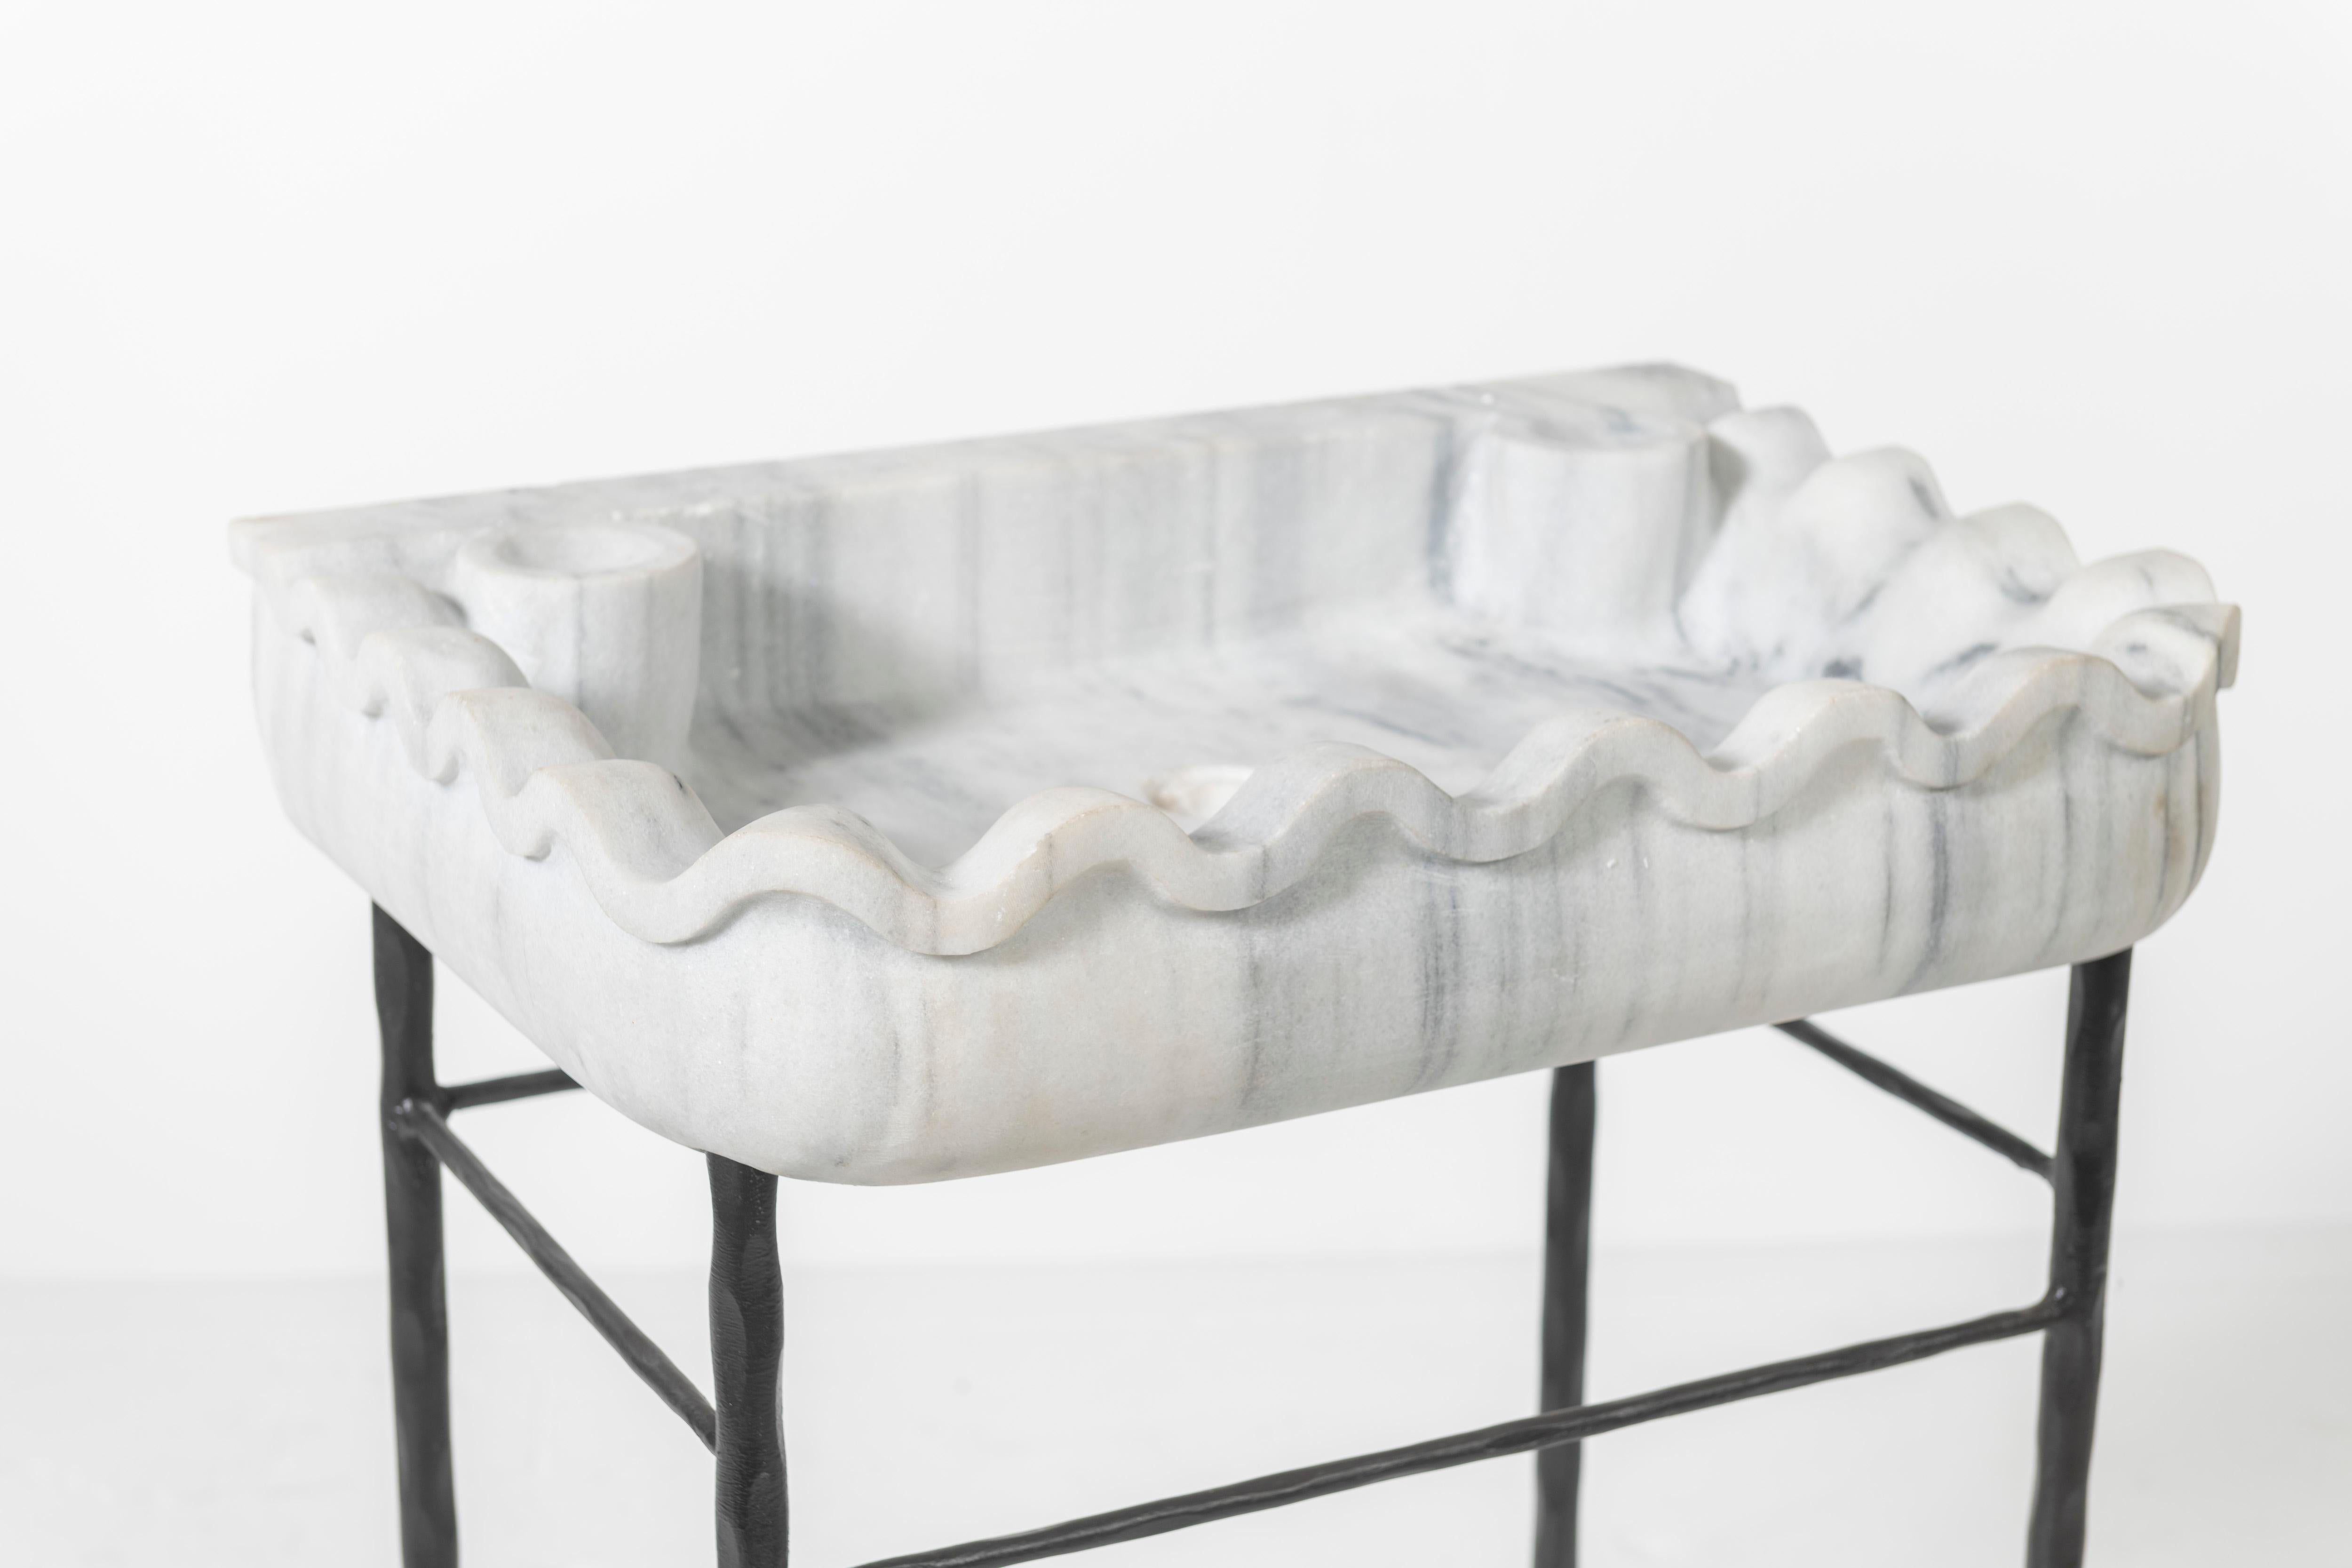 Late 19th Century Italian Carrara Marble Sink Basin, cut from one block of Carrara marble, featuring the serpentine shaped fluted surround. The basin rests on a 
forged iron stand that is also sculpted in a gentle wave. Stunning piece for either